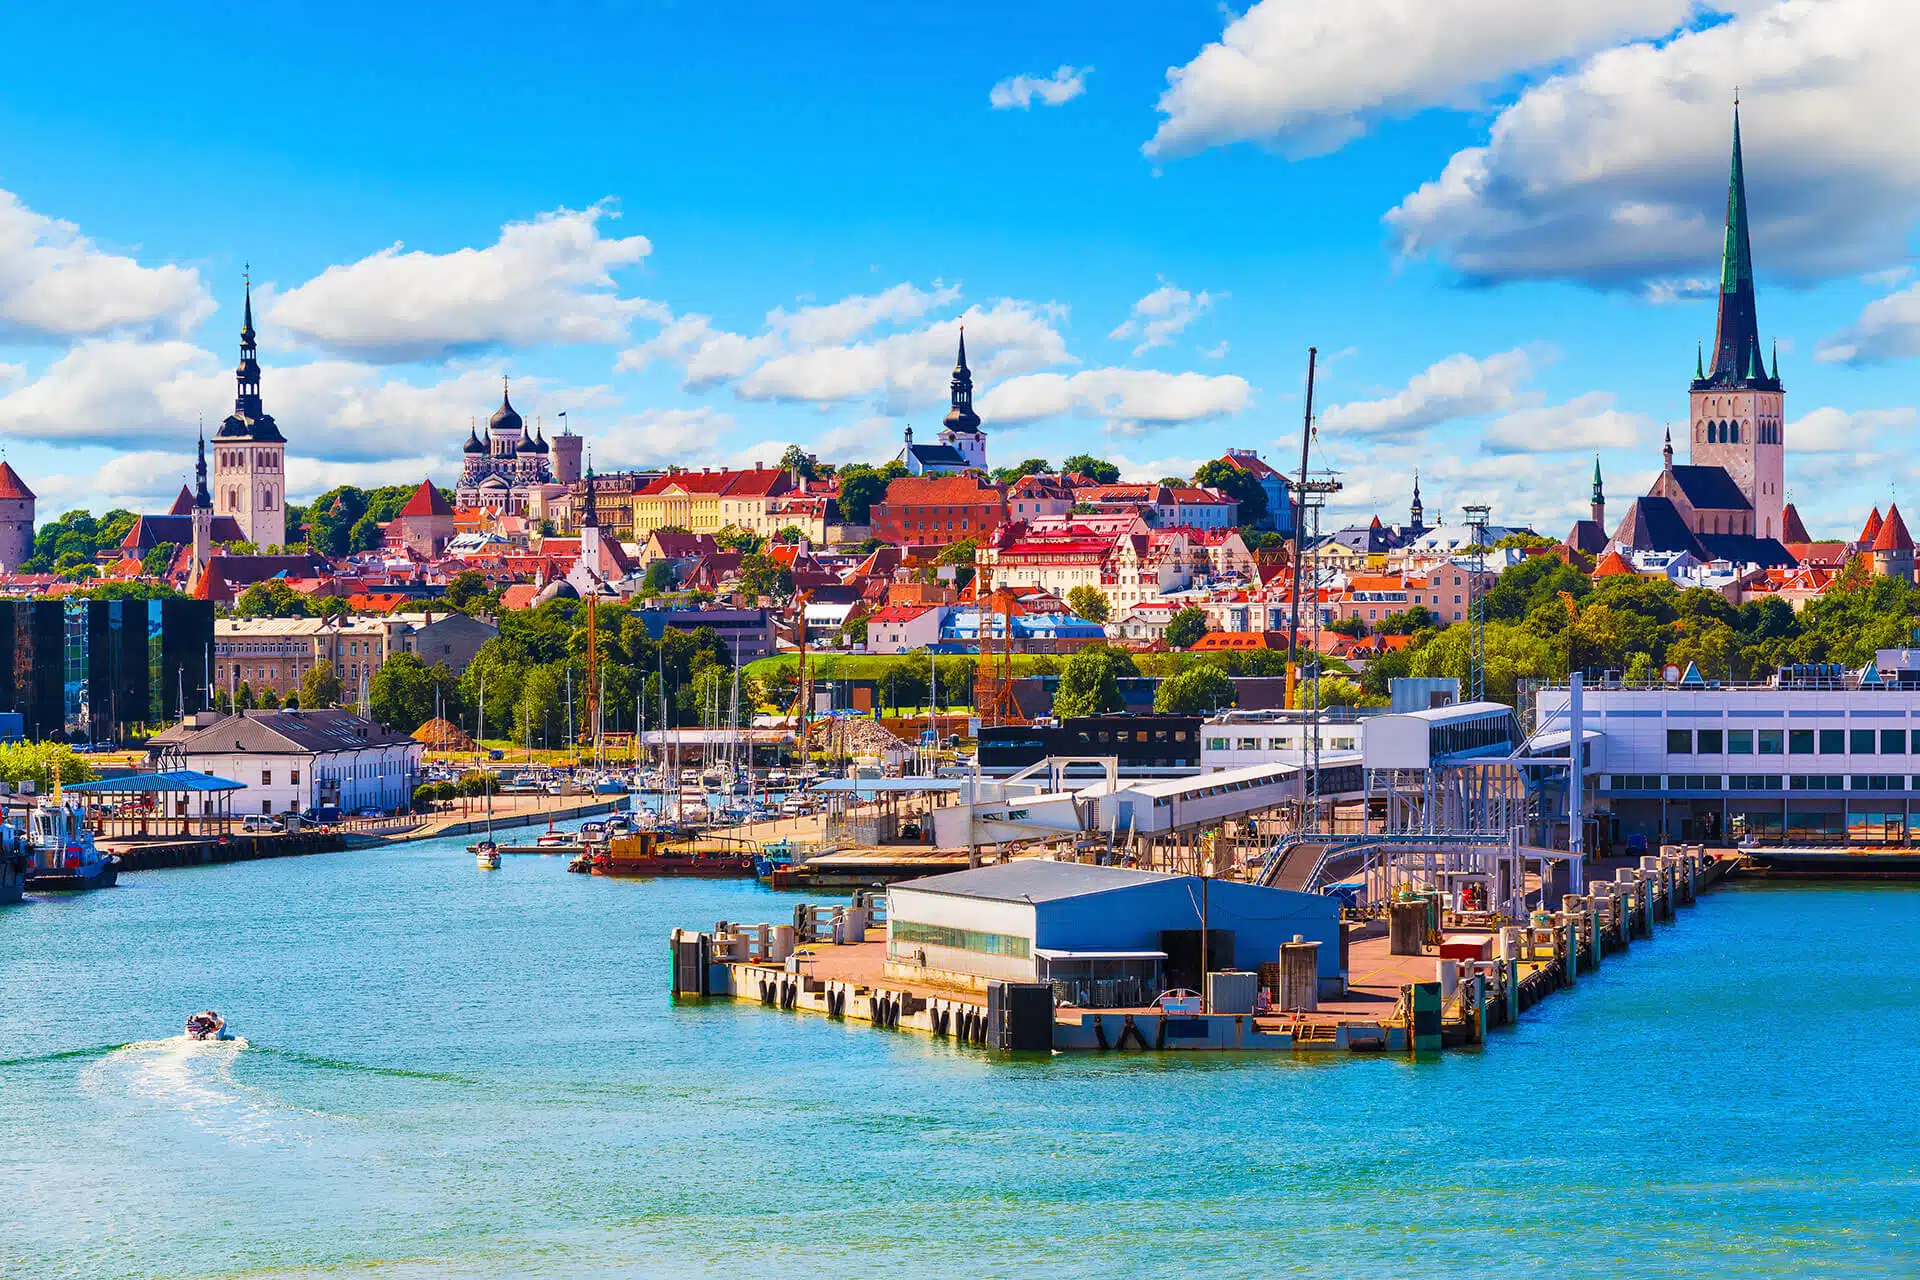 Get a crypto license in Estonia with experts